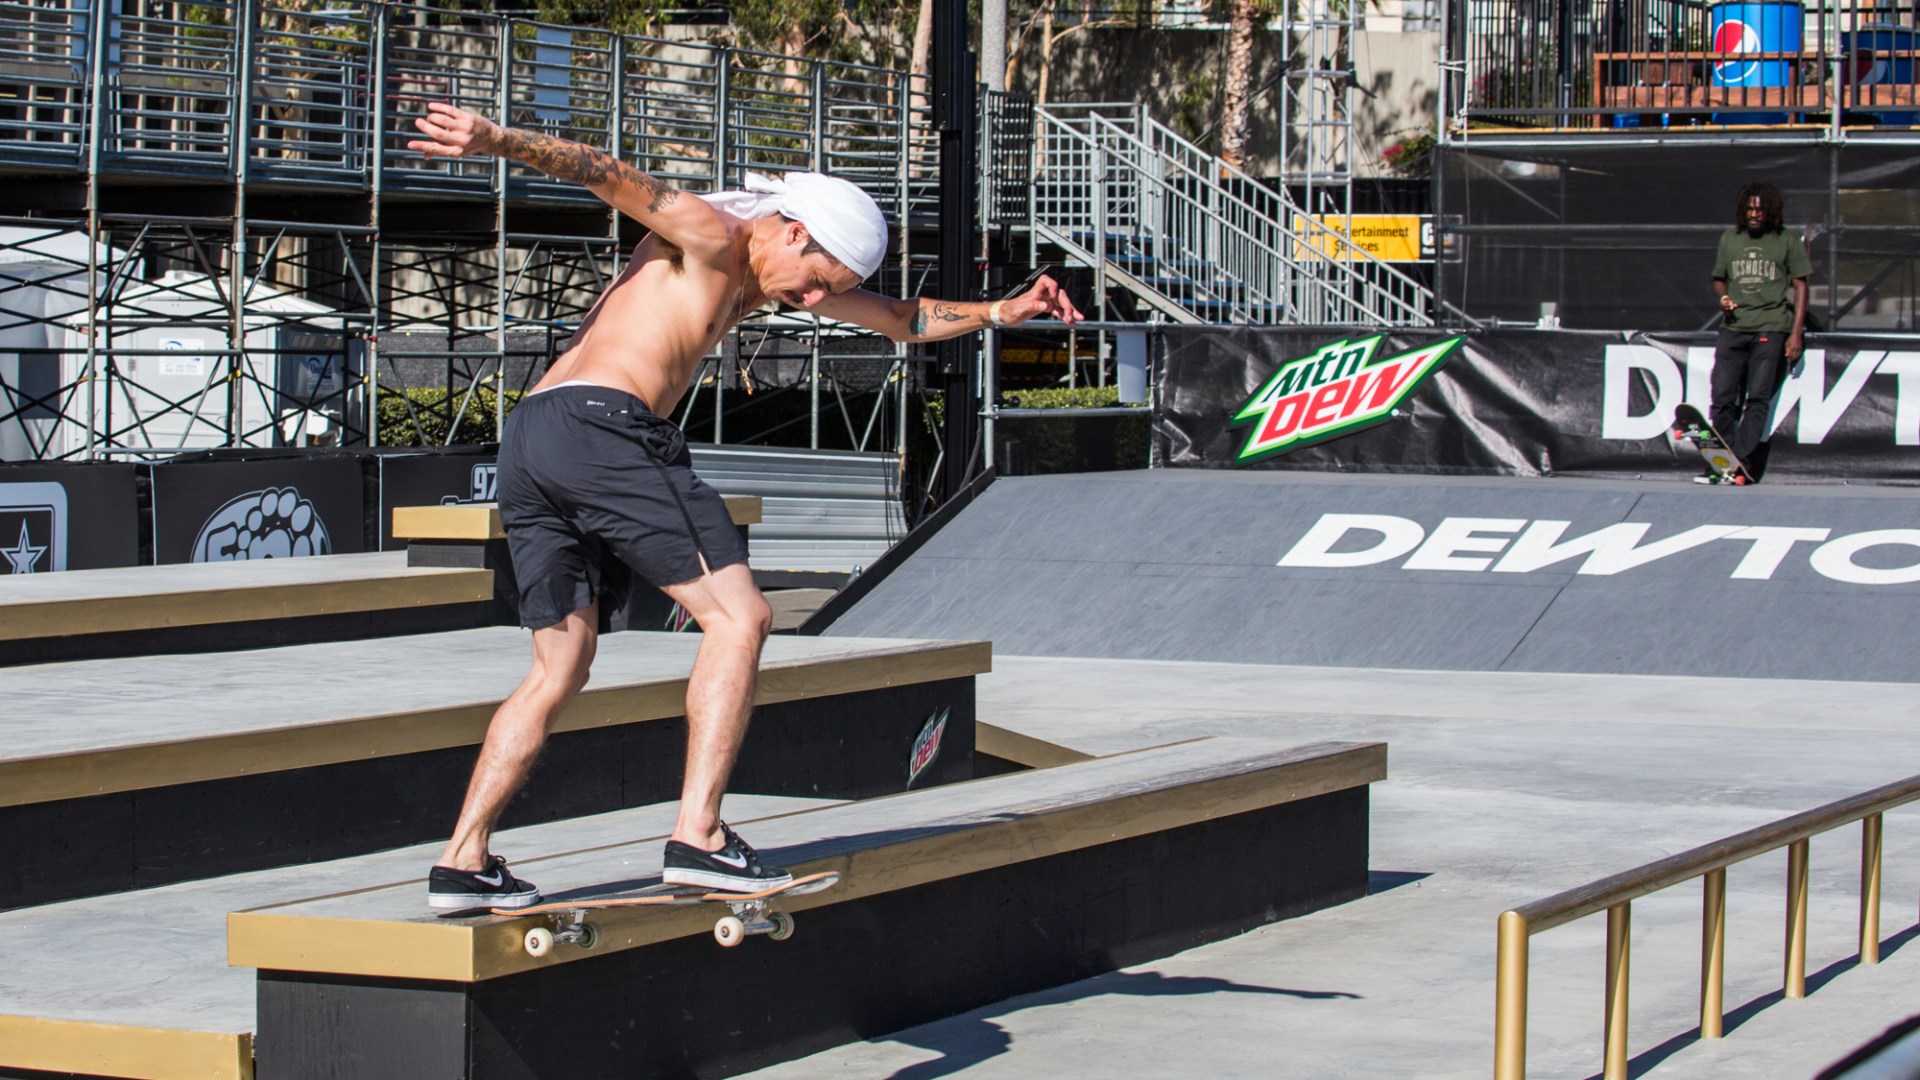 Dew Tour Long Beach 2016: Day Two Practice Photo